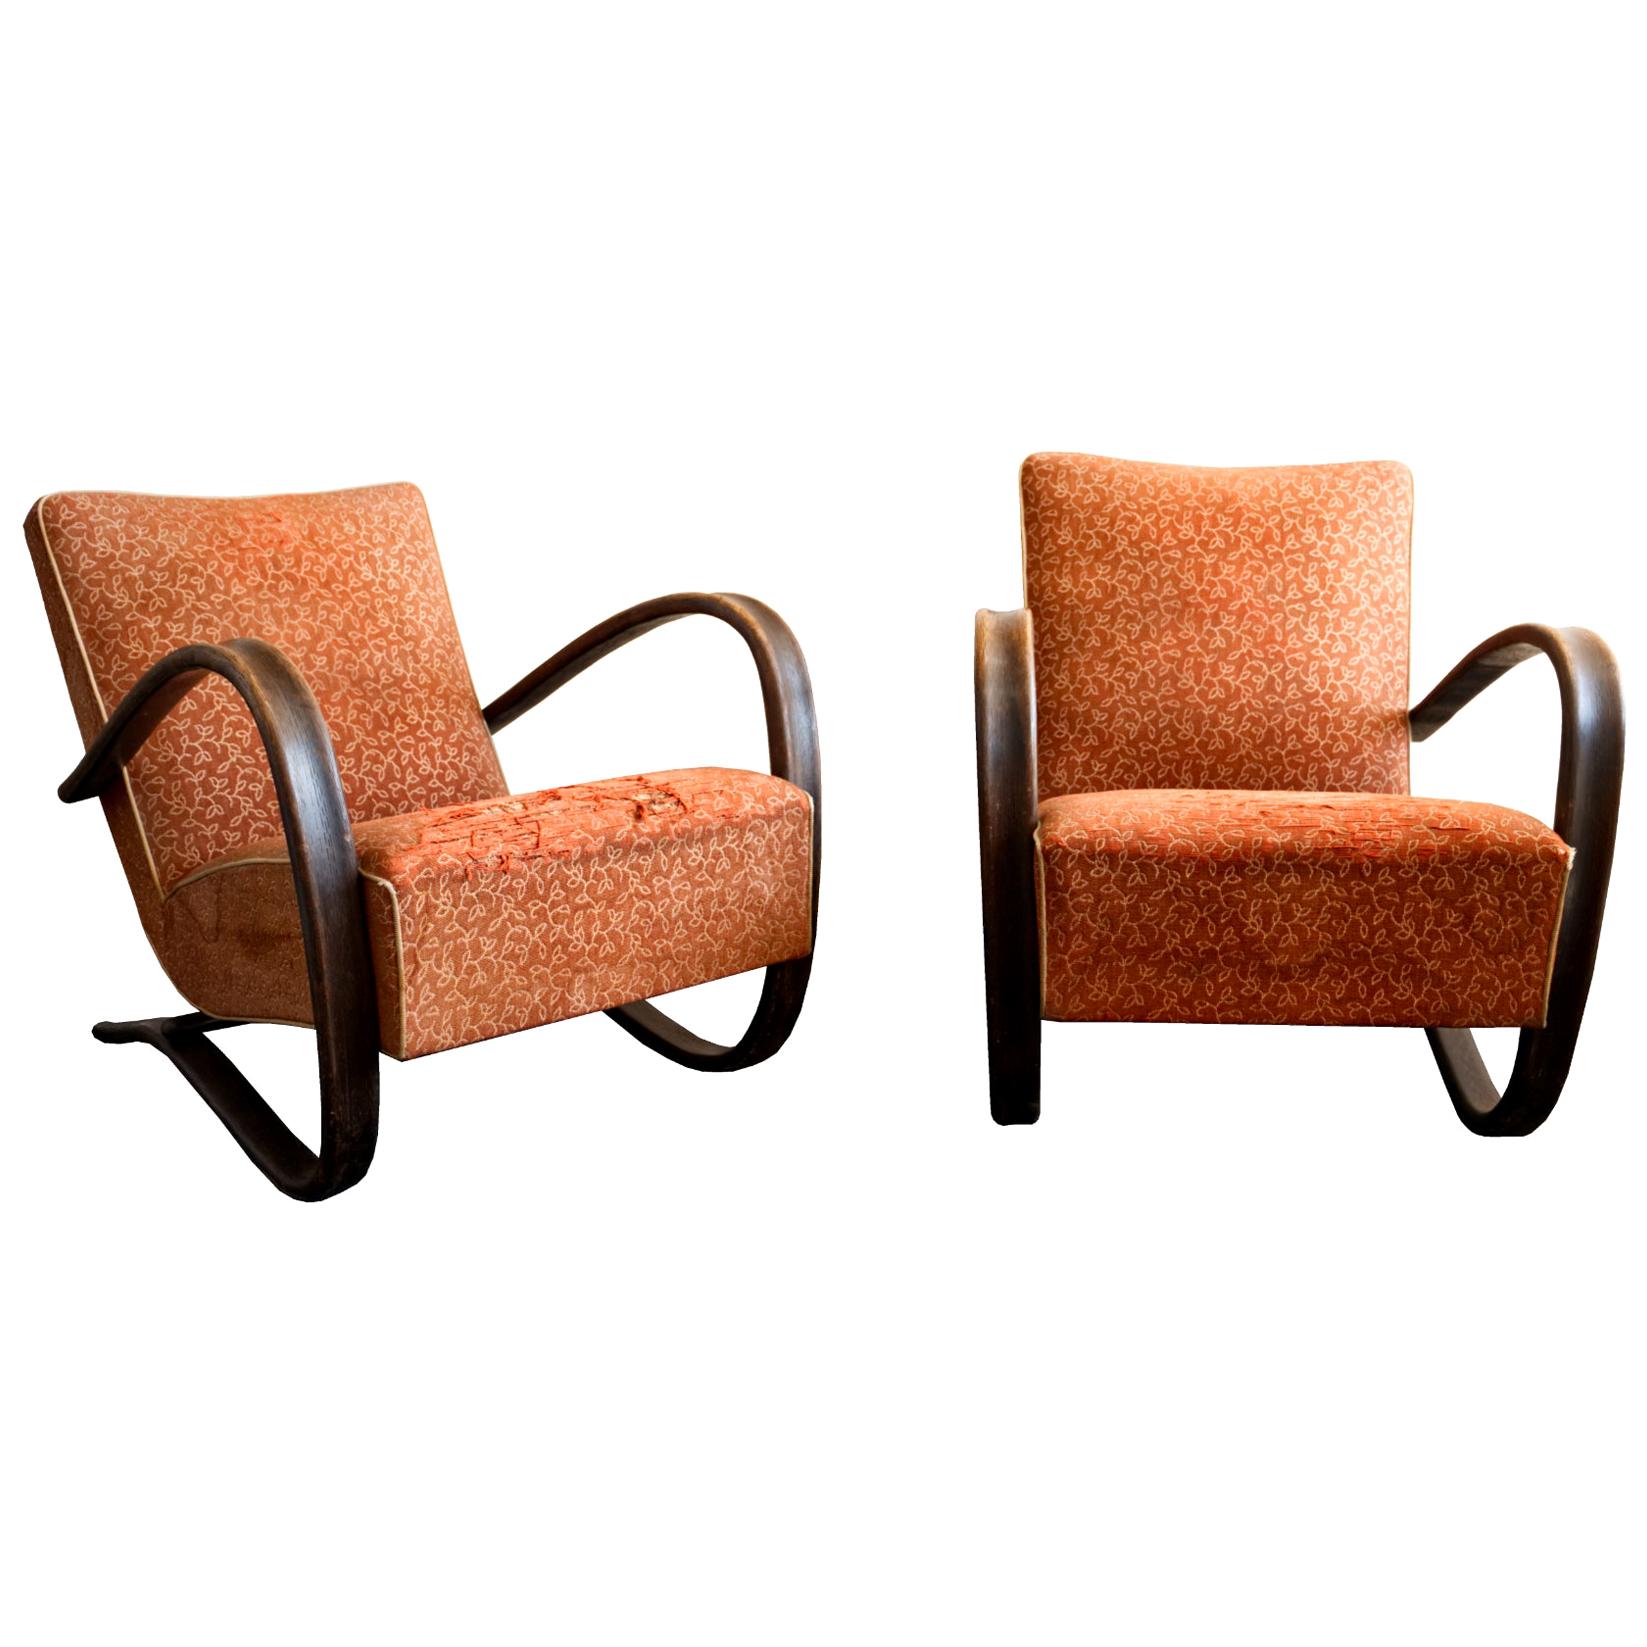 Pair of H269 Lounge Chairs by Jindrich Halabala for UP Závody Brno, 1930s